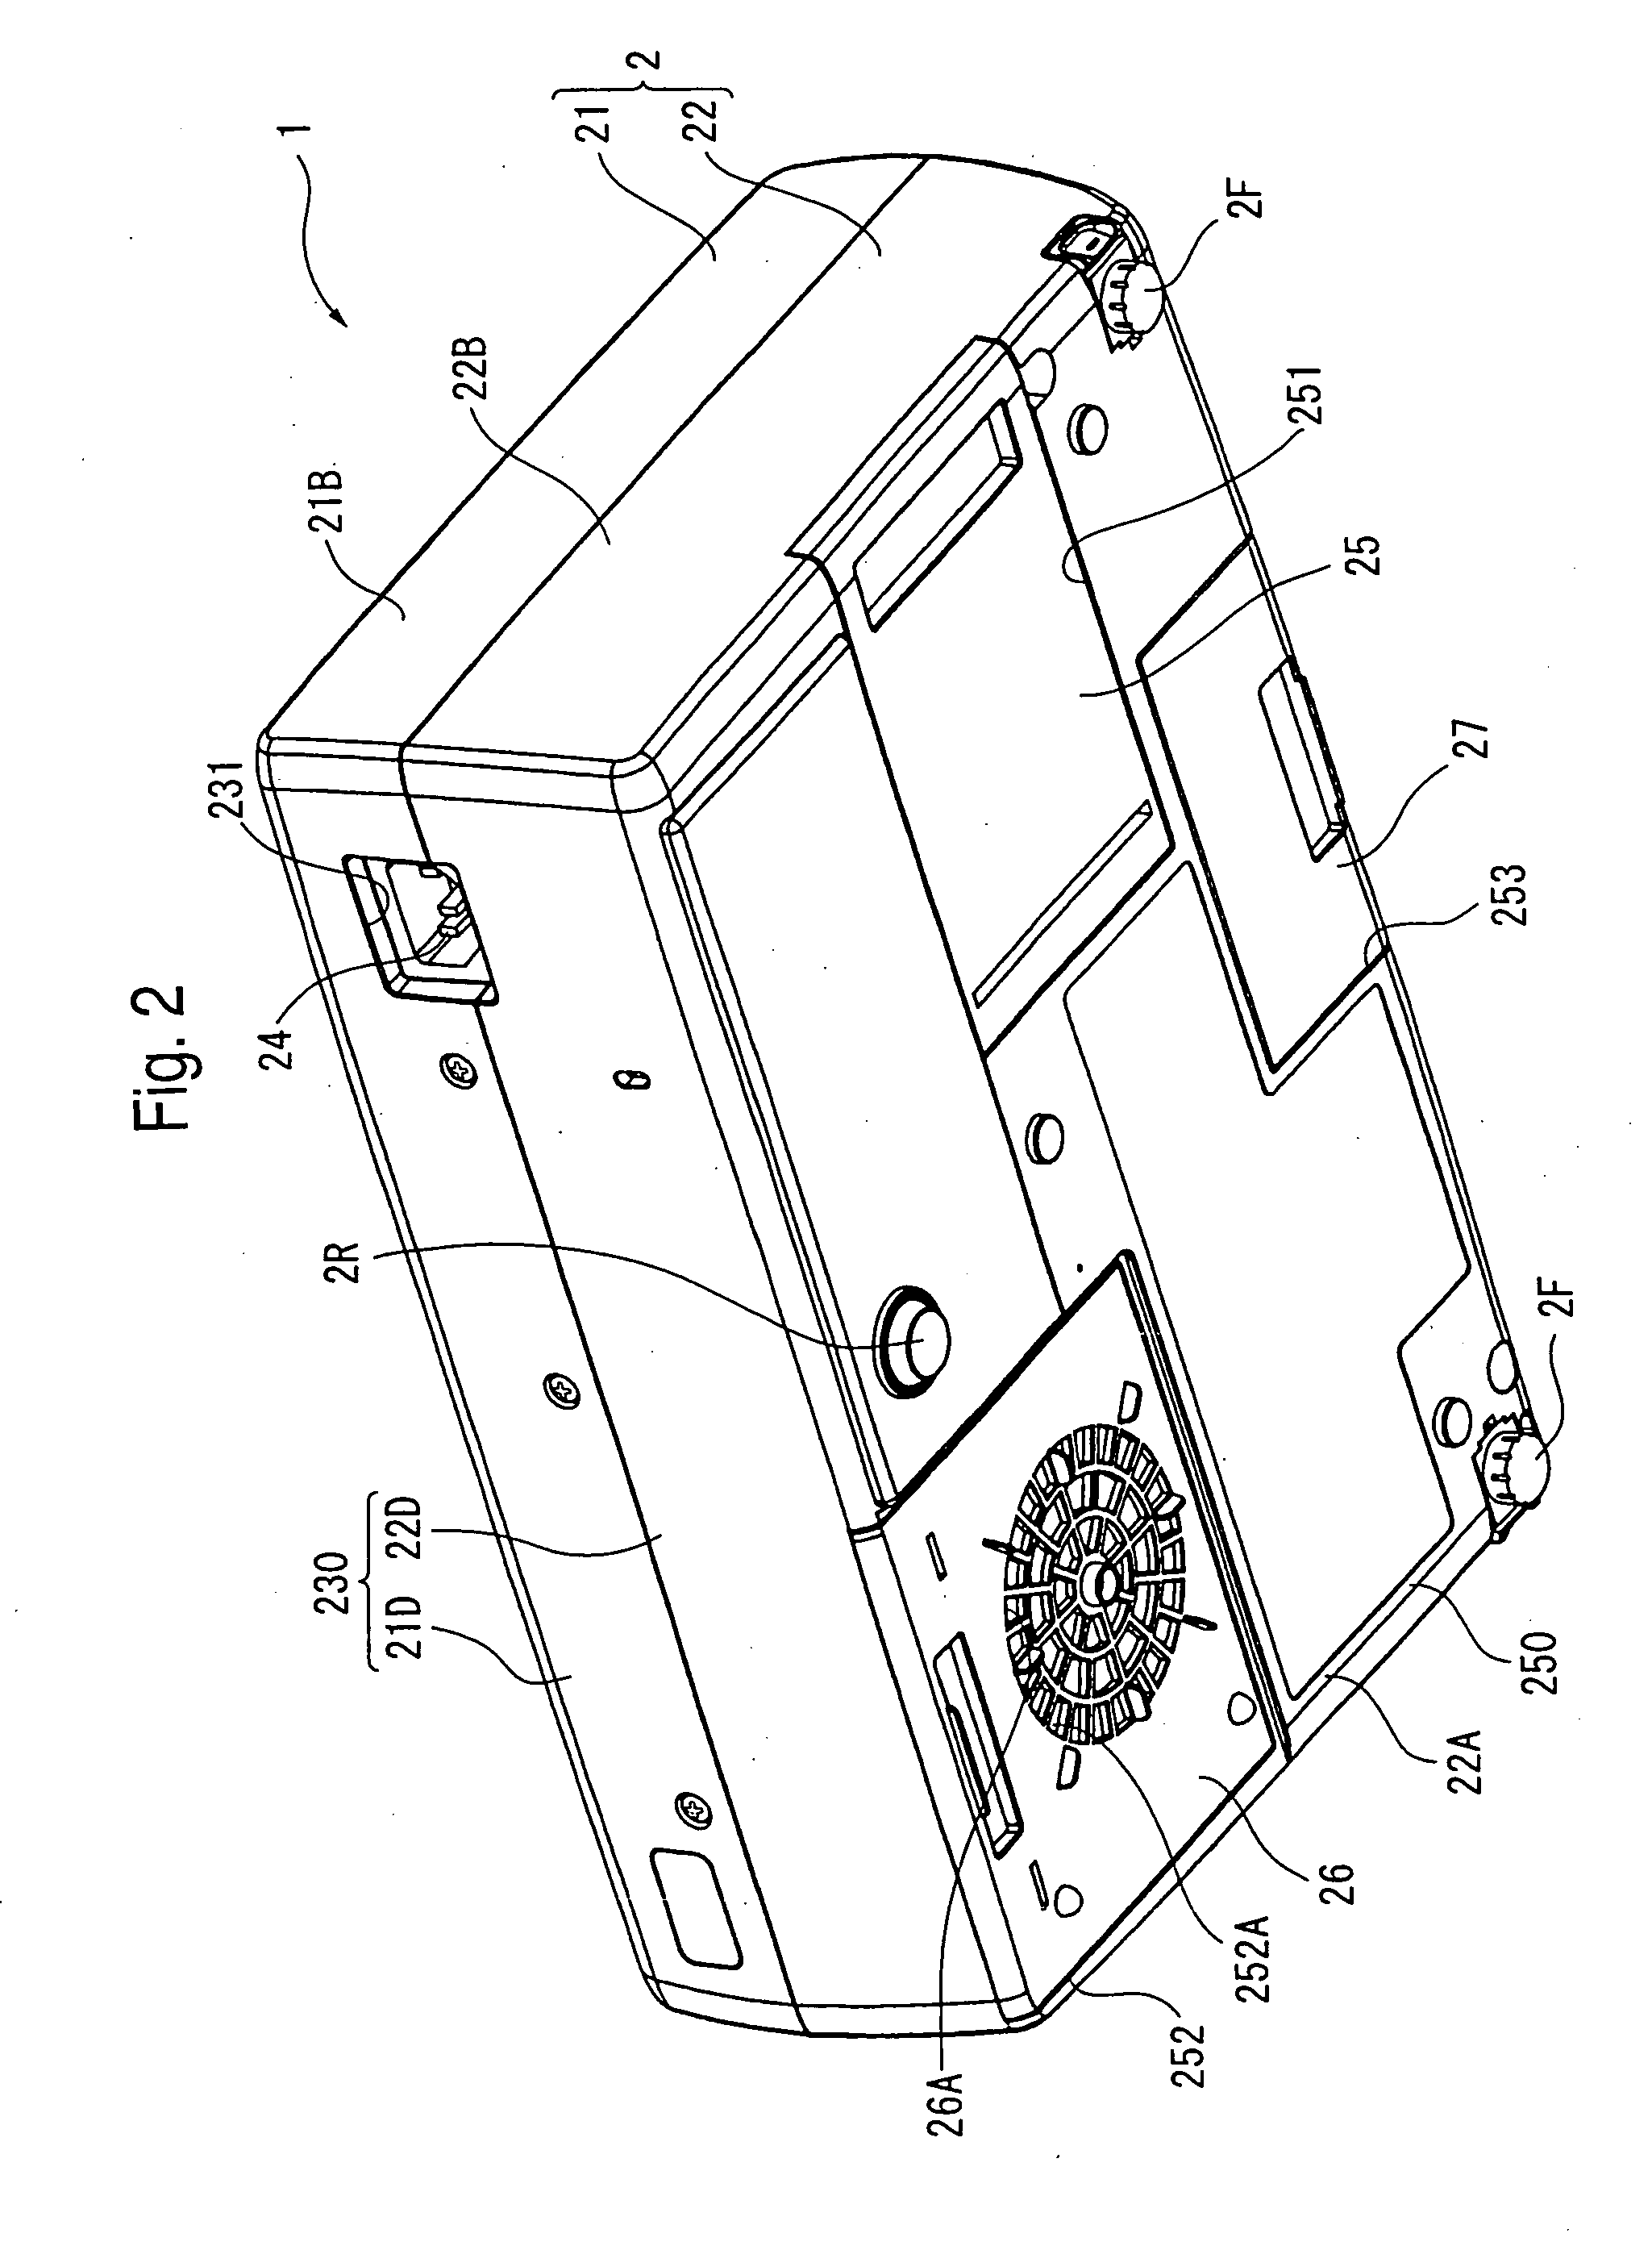 Axial-flow fan and projector provided with the same